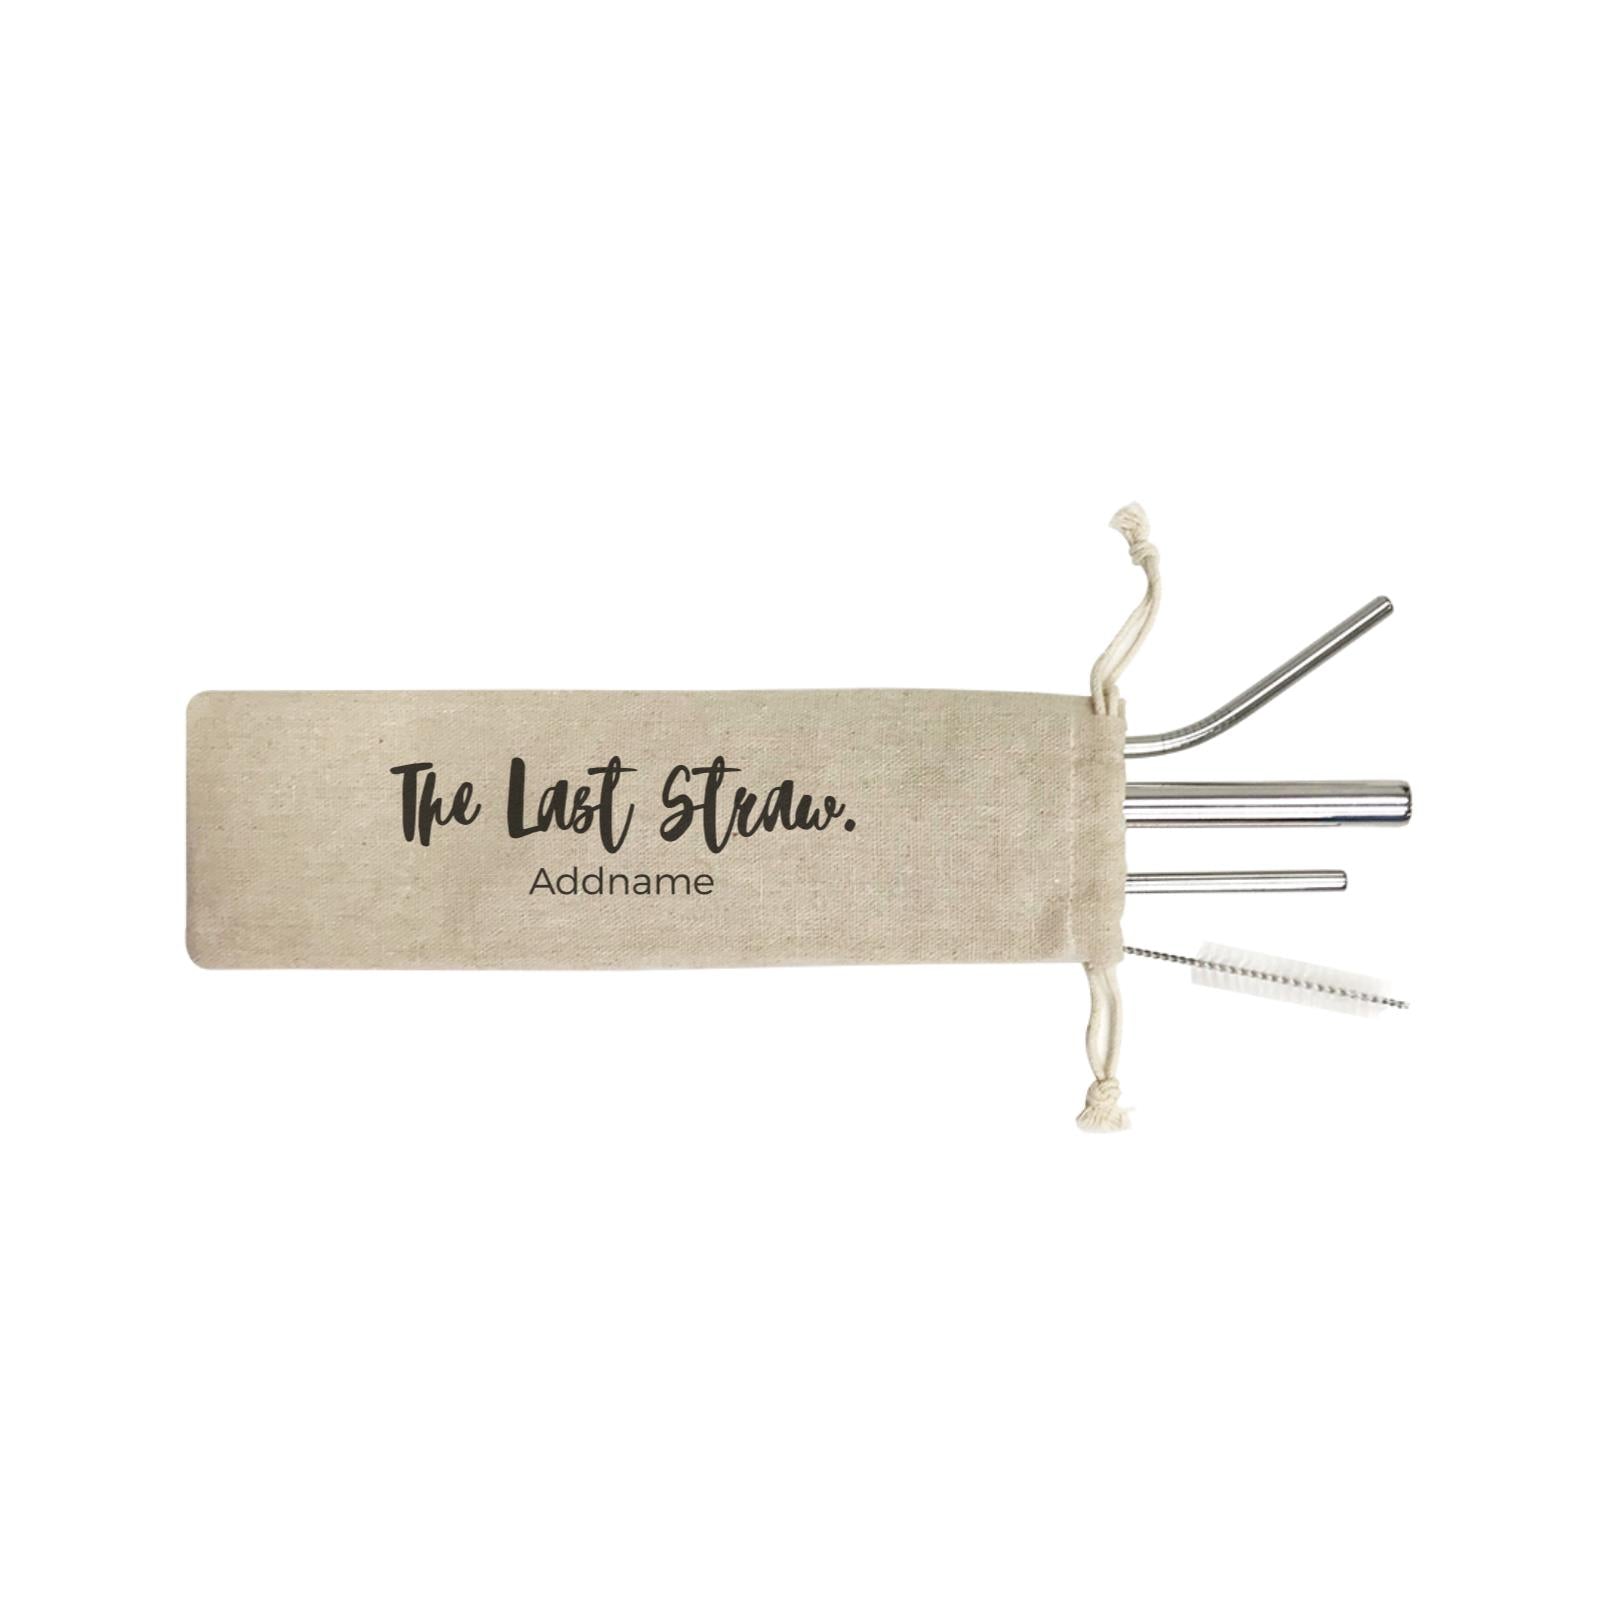 Environment The Last Straw Addname SB 4-In-1 Stainless Steel Straw Set in Satchel